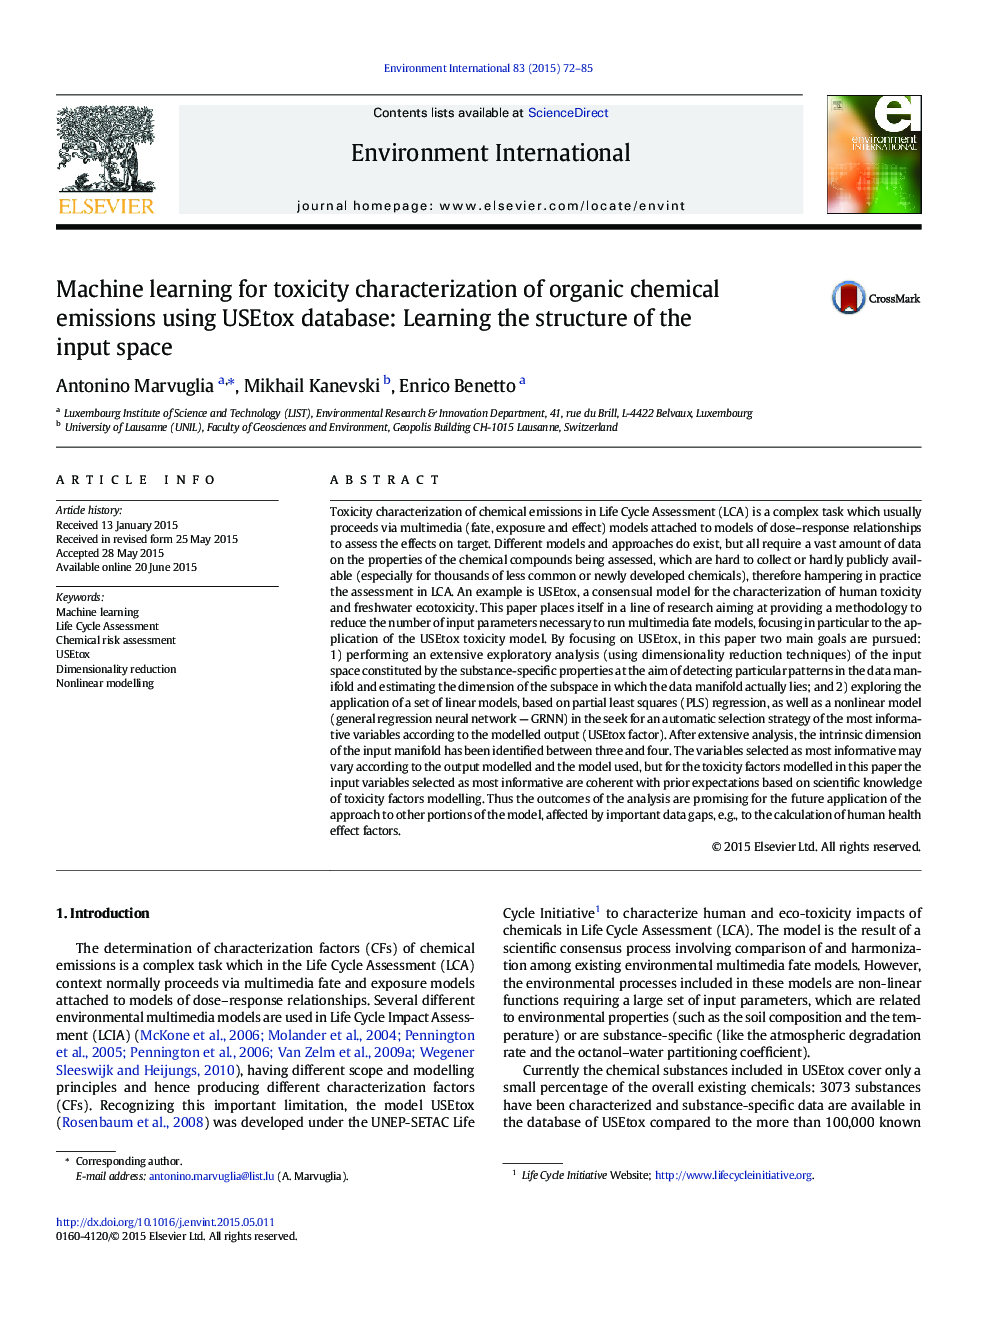 Machine learning for toxicity characterization of organic chemical emissions using USEtox database: Learning the structure of the input space